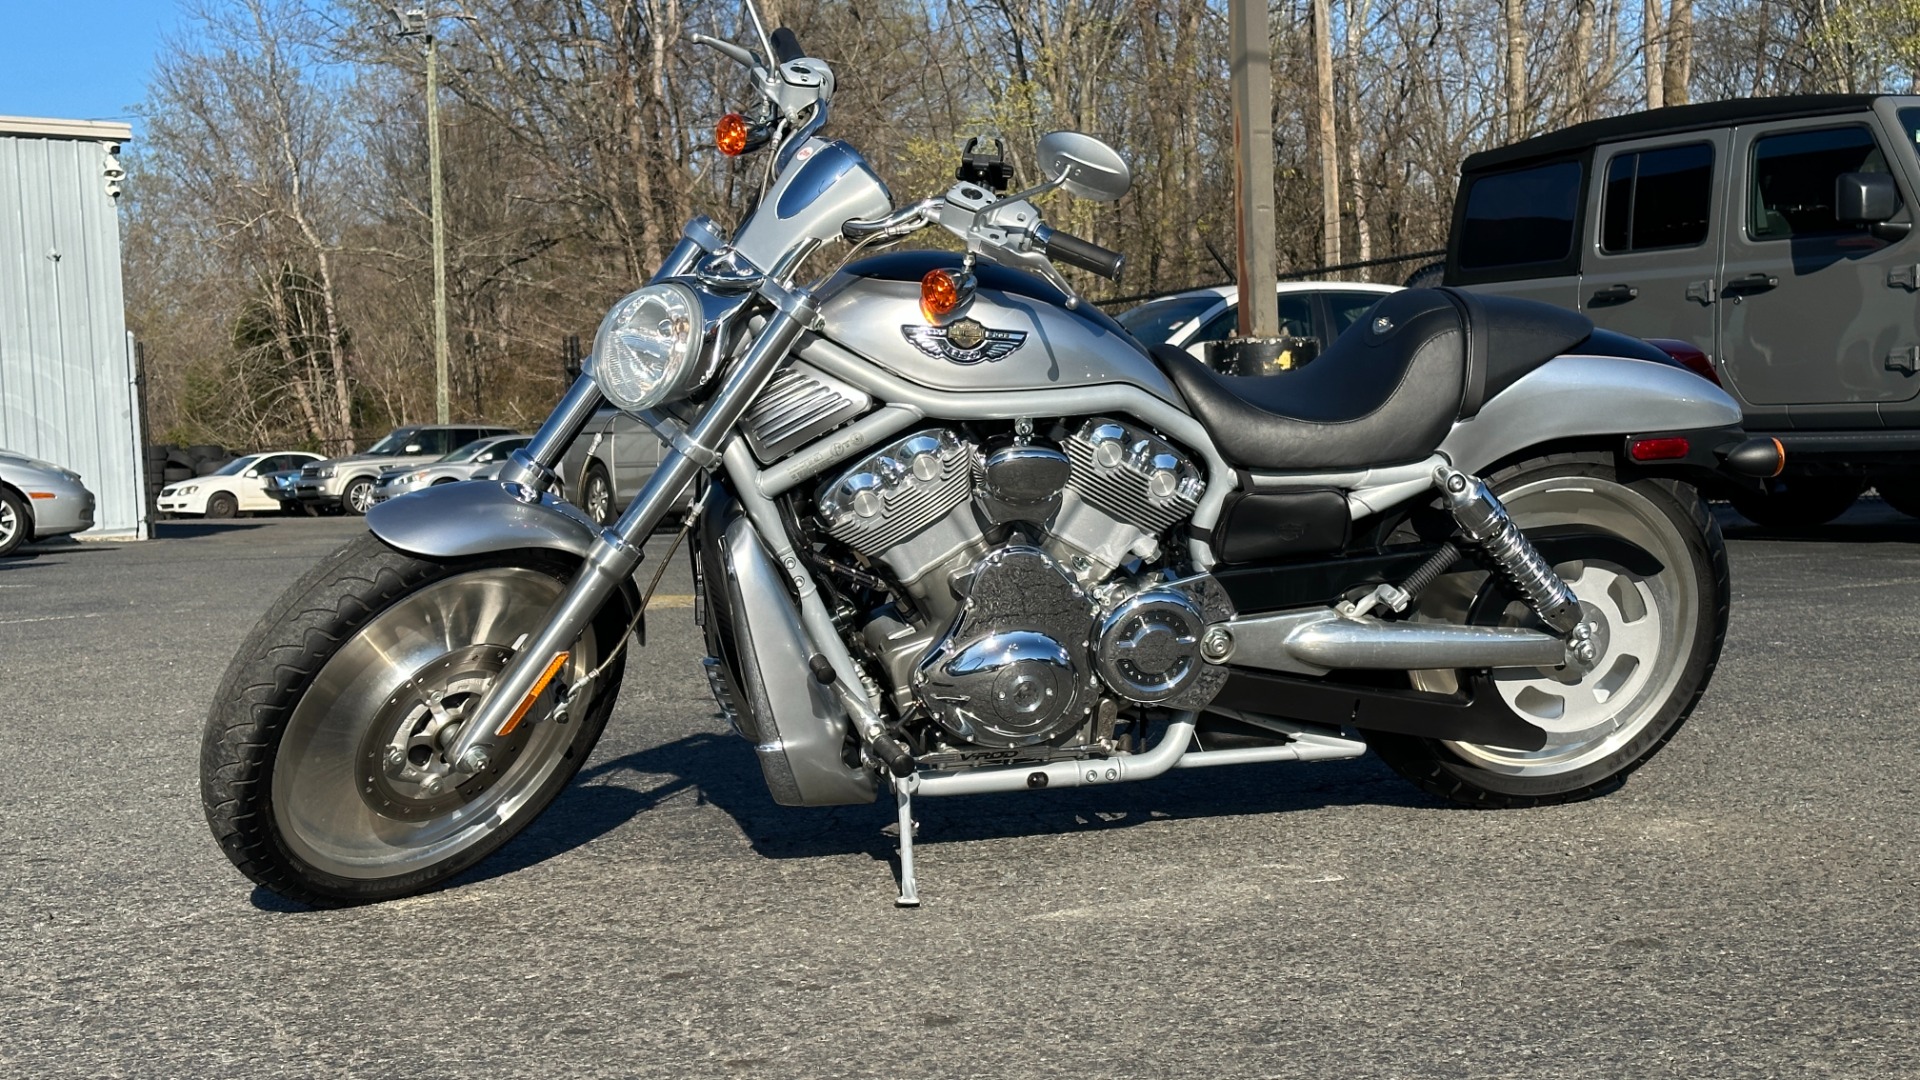 Used 2003 Harley Davidson V Rod ANNIVERSARY EDITION / 1130CC ENGINE / BREMBO BRAKES / VORTEX AIR SCOOPS for sale $9,995 at Formula Imports in Charlotte NC 28227 56